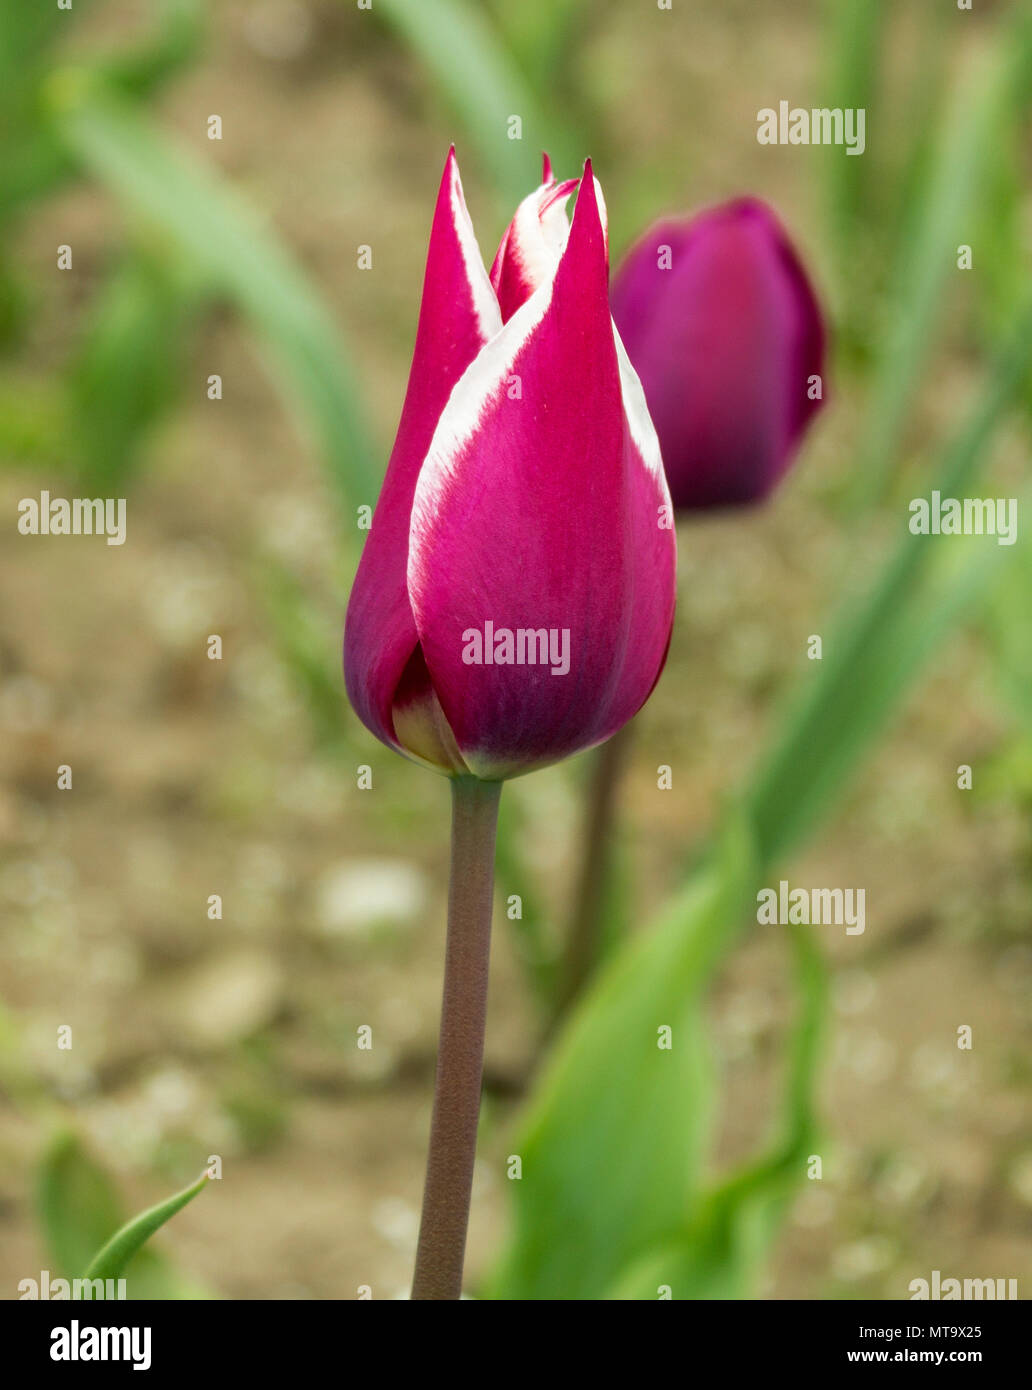 One purple and white tulip in focus against a blurred background of other tulips Stock Photo